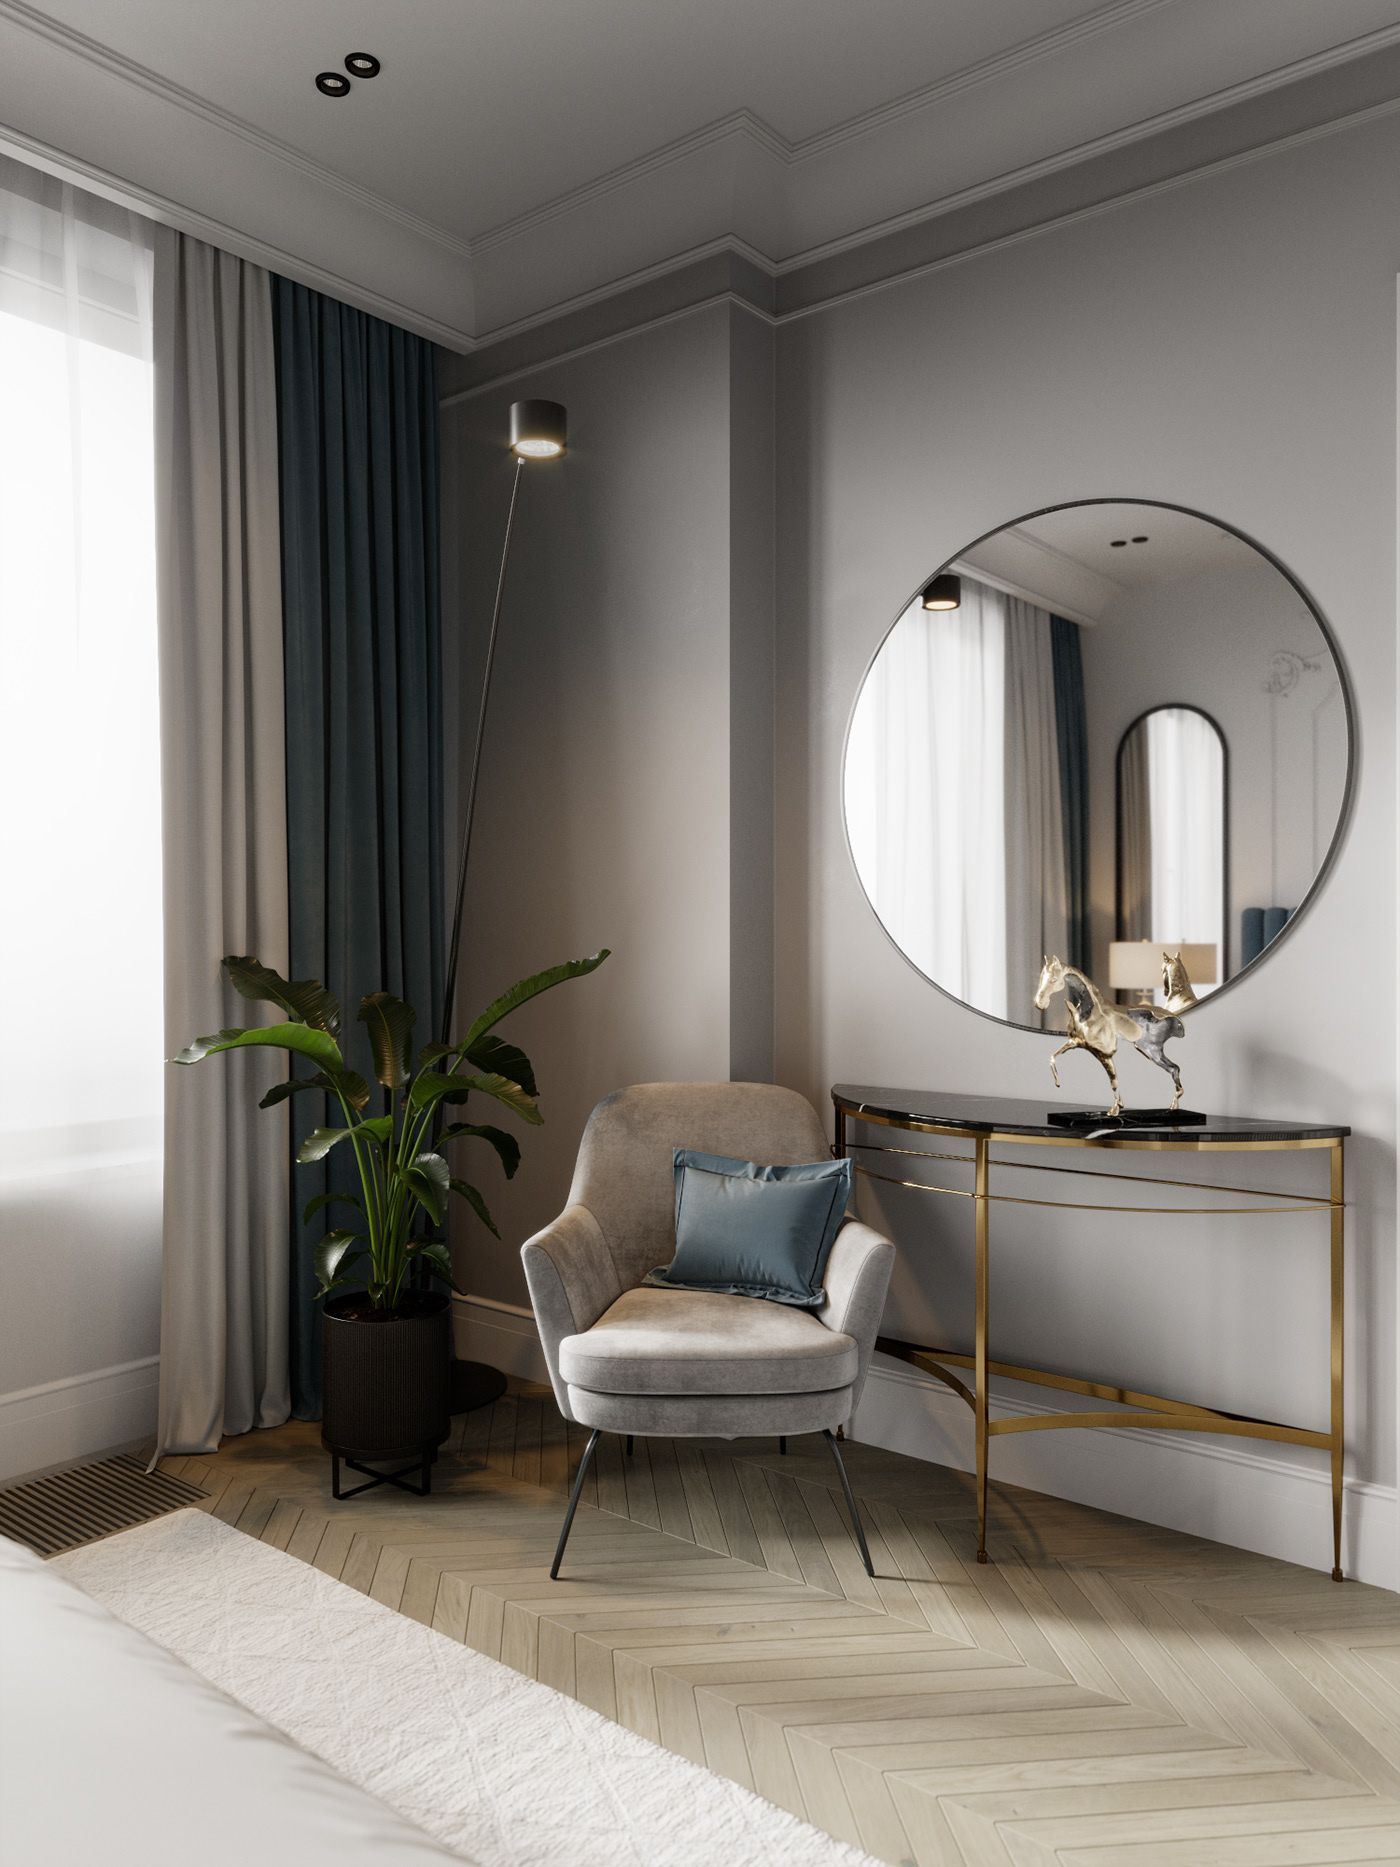 A great corner to relax and enjoy the warm rays of sunlight streaming through the transparent mirror door. The round wall mirror brings depth to the room as well as strengthens aesthetics.